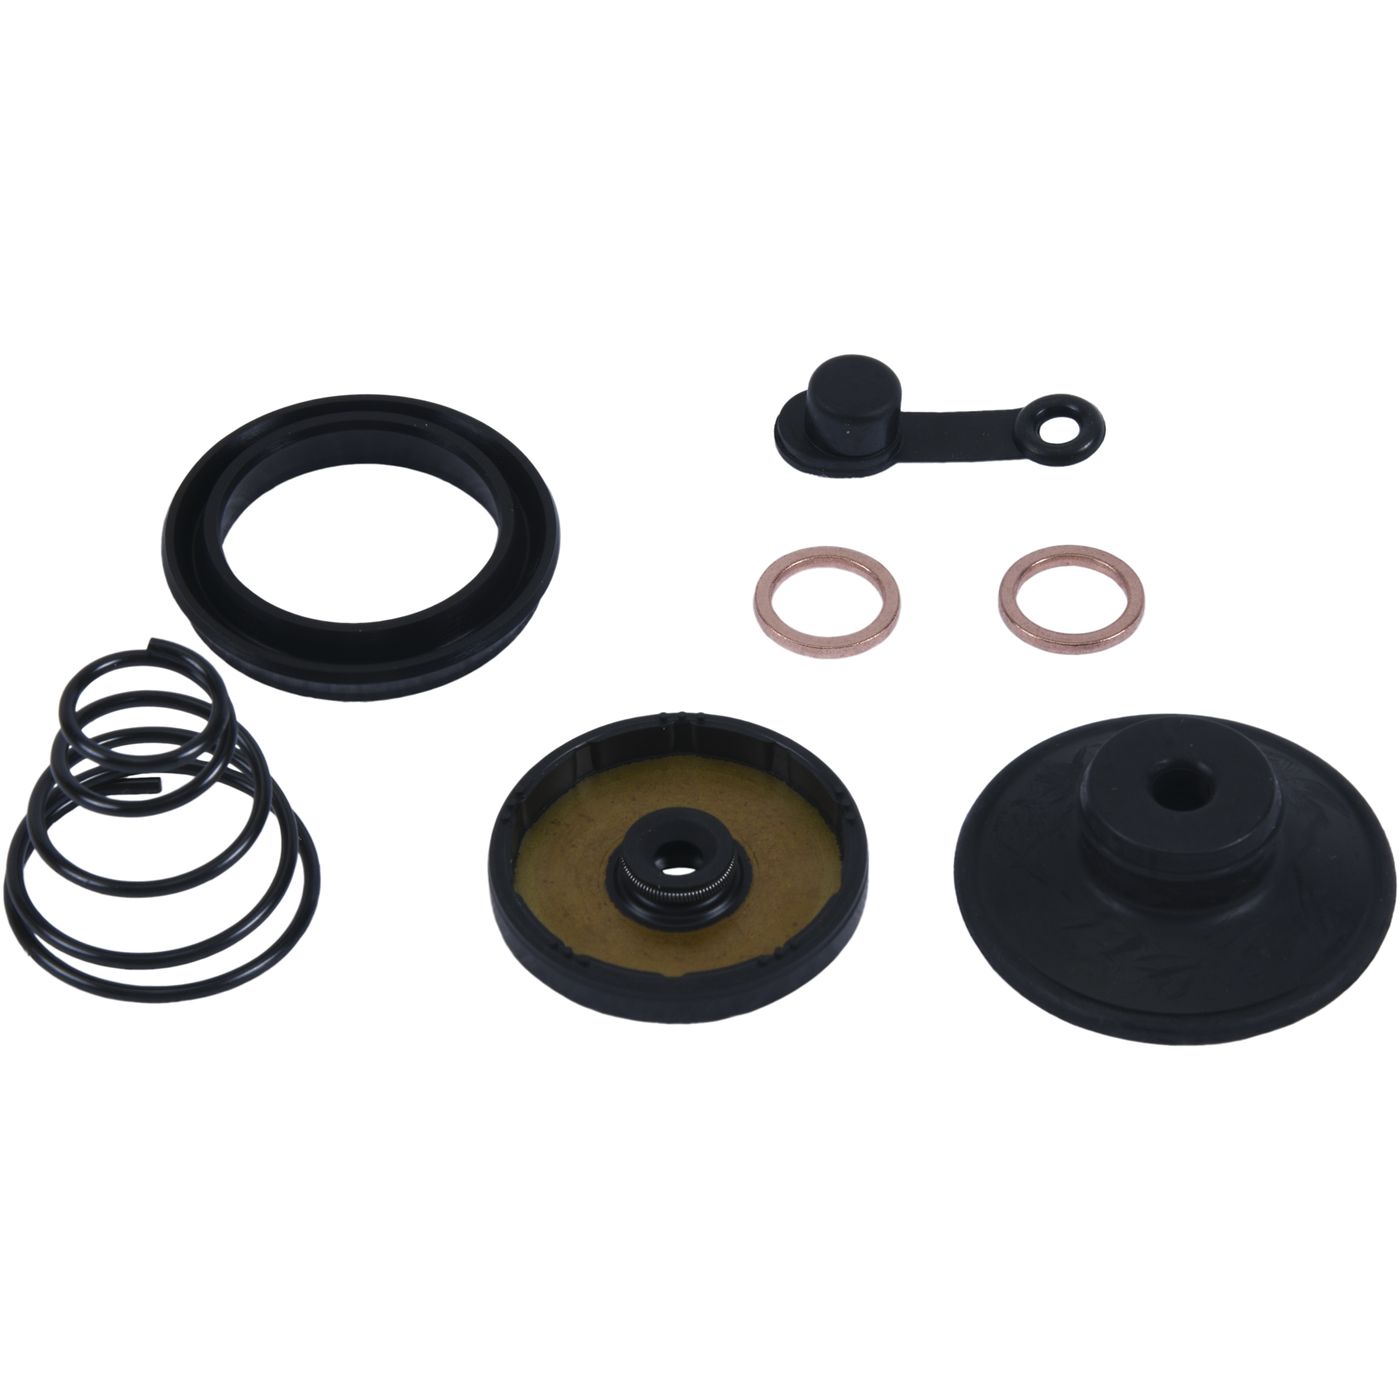 Wrp Clutch Slave Cylinder Kits - WRP186020 image